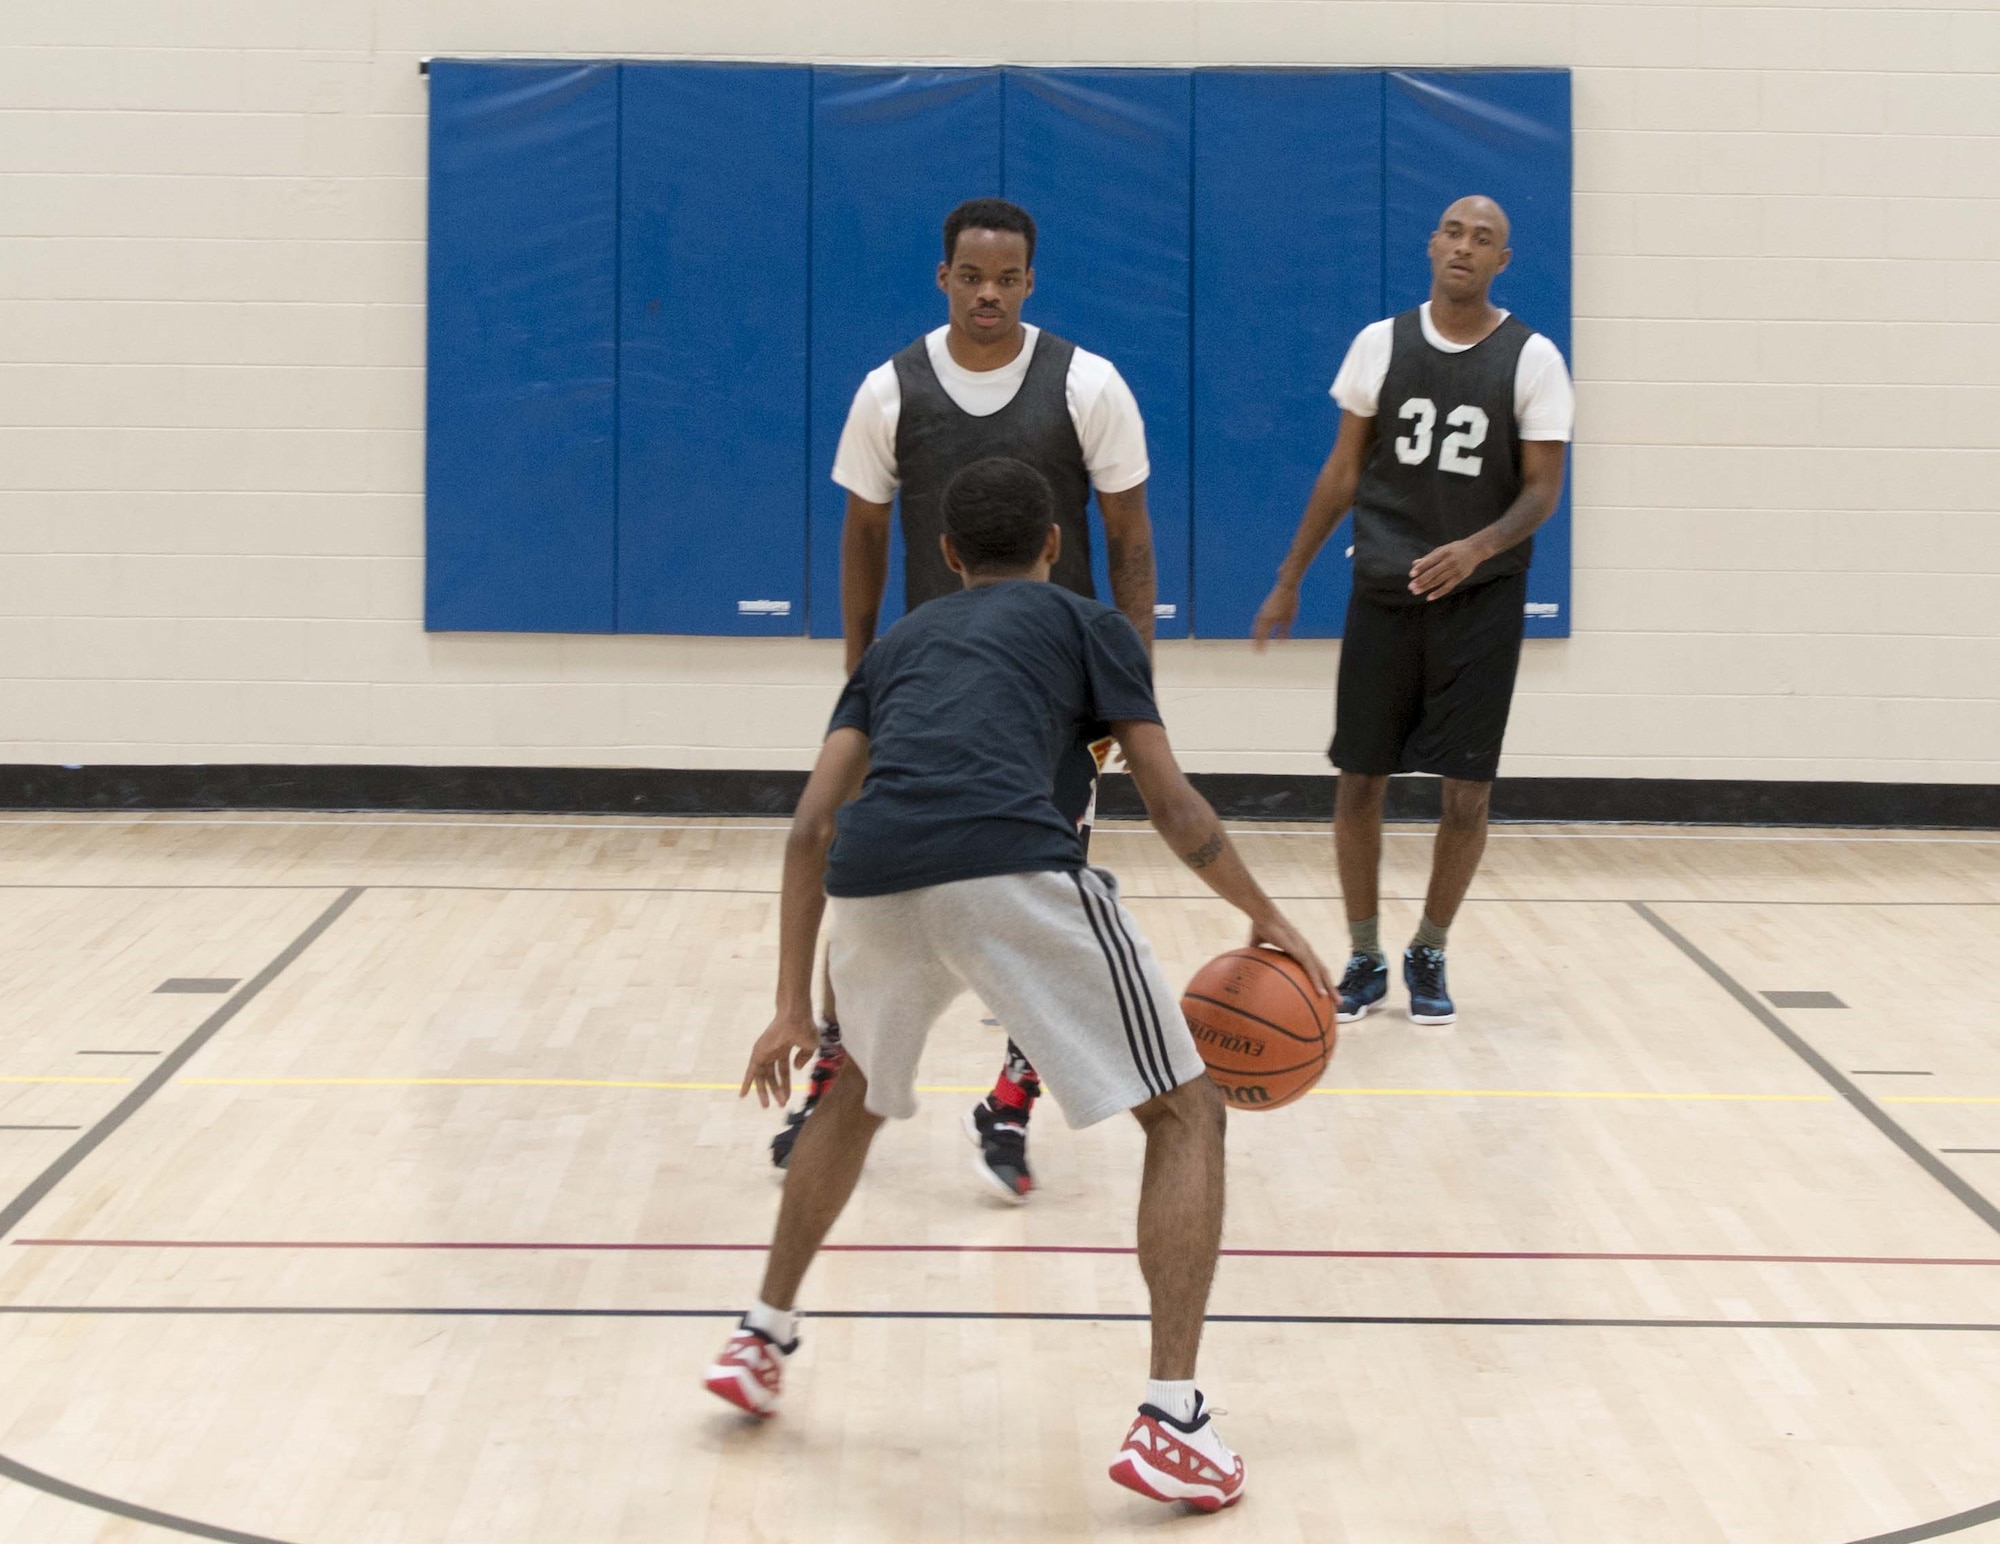 Team Shaw members play in the Four Chaplains 3-on-3 Basketball Tournament at the 20th Force Support Squadron main fitness center at Shaw Air Force Base (AFB), S.C., June 15, 2018.